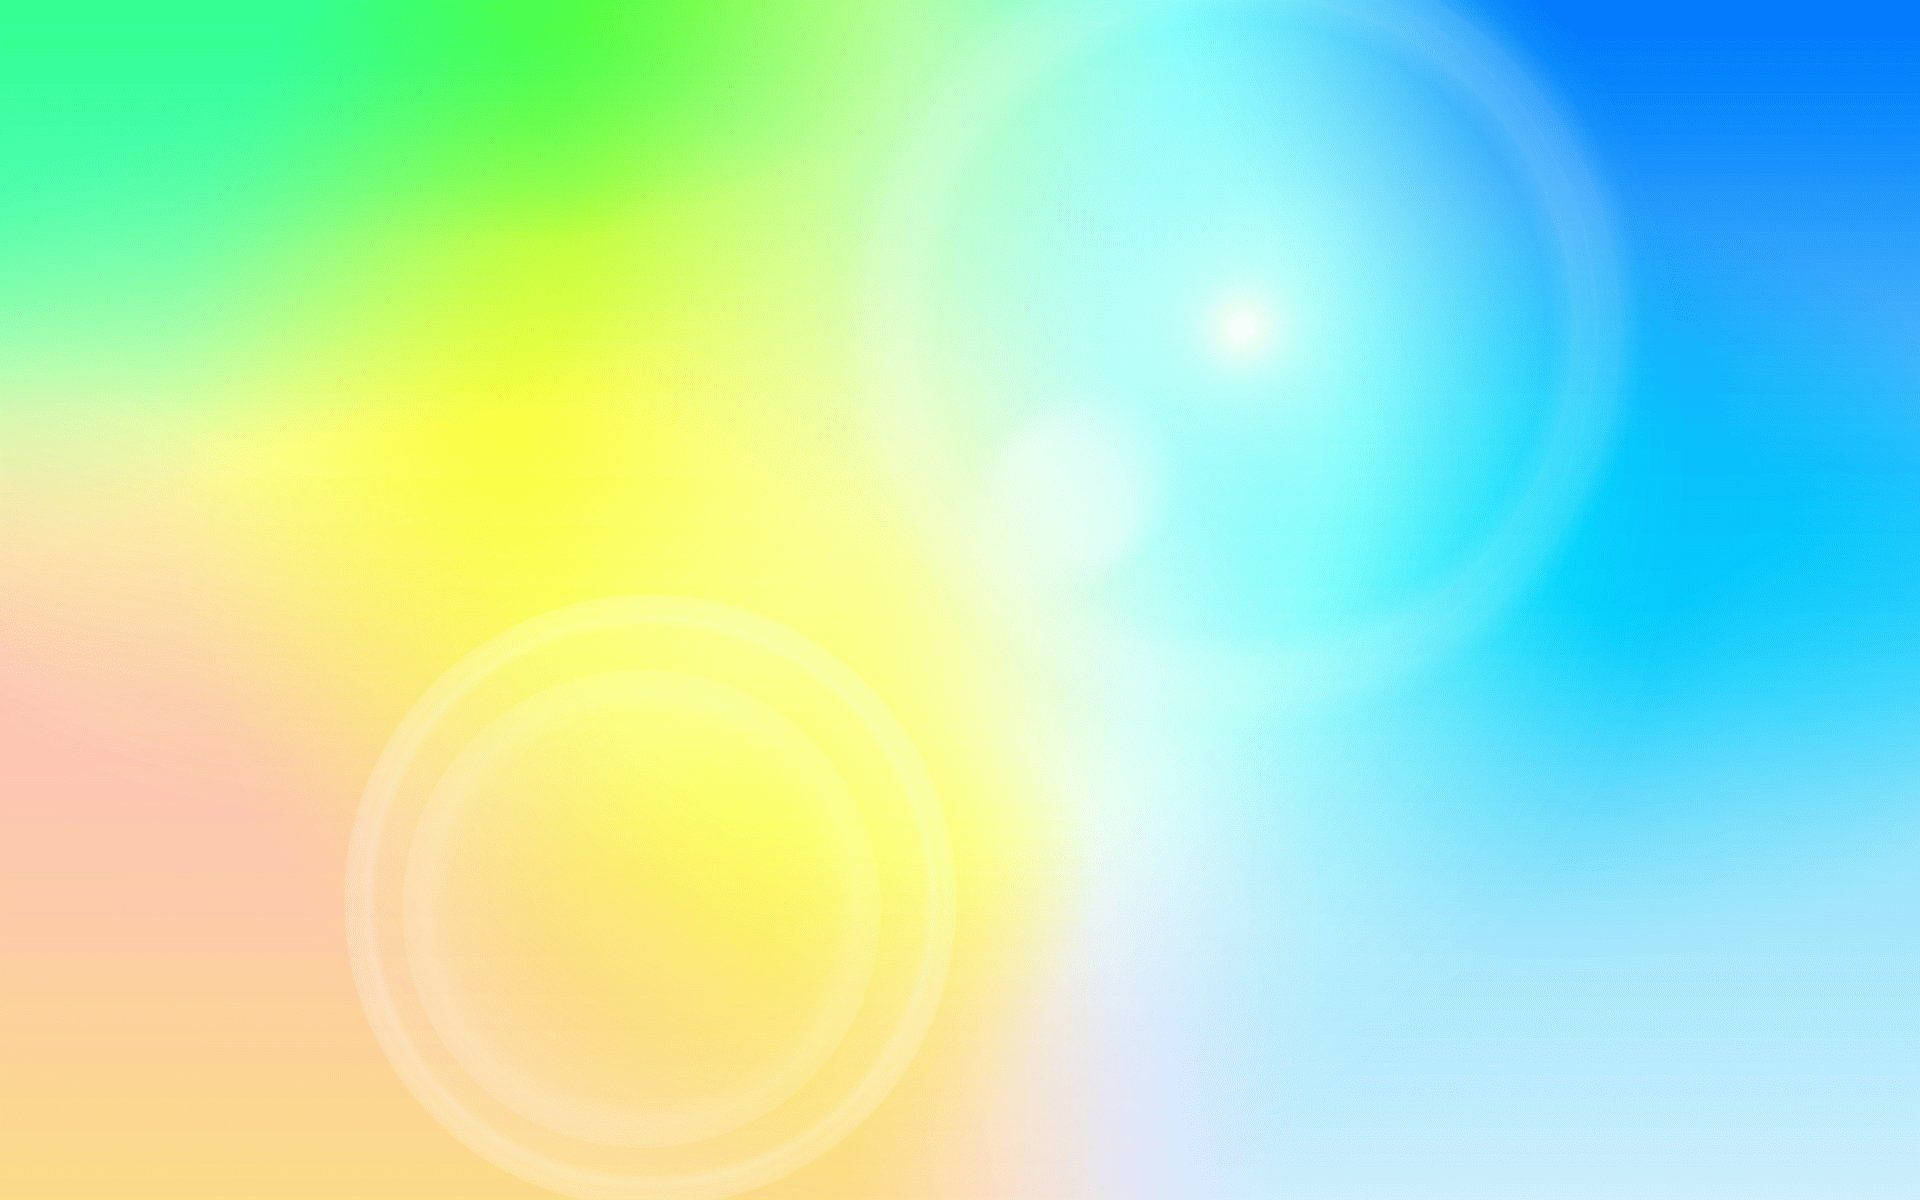 Light yellow, green and blue background with light spots.